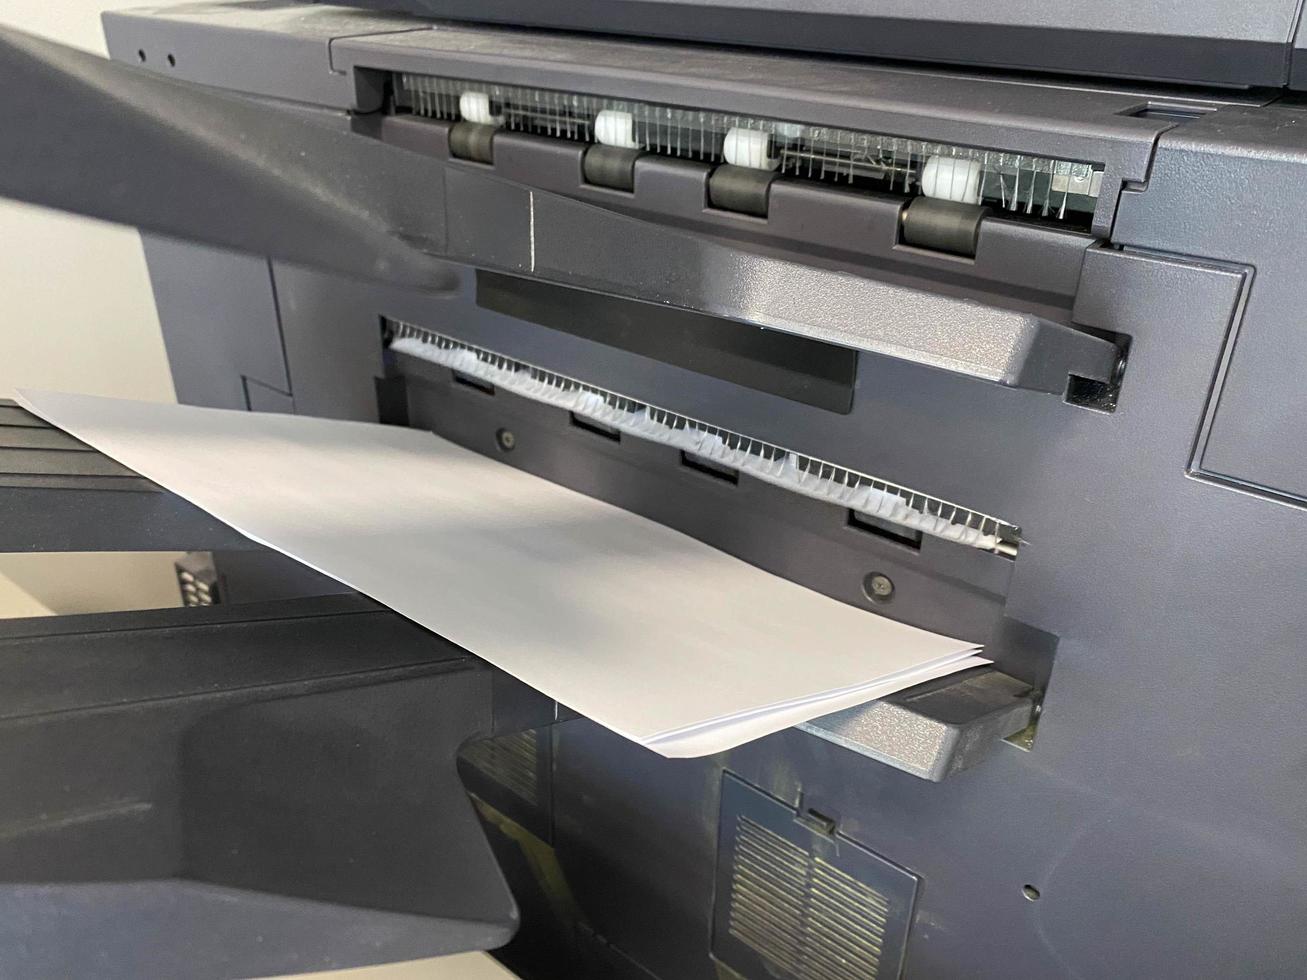 A white sheet of paper comes out of an office printer for printing photo